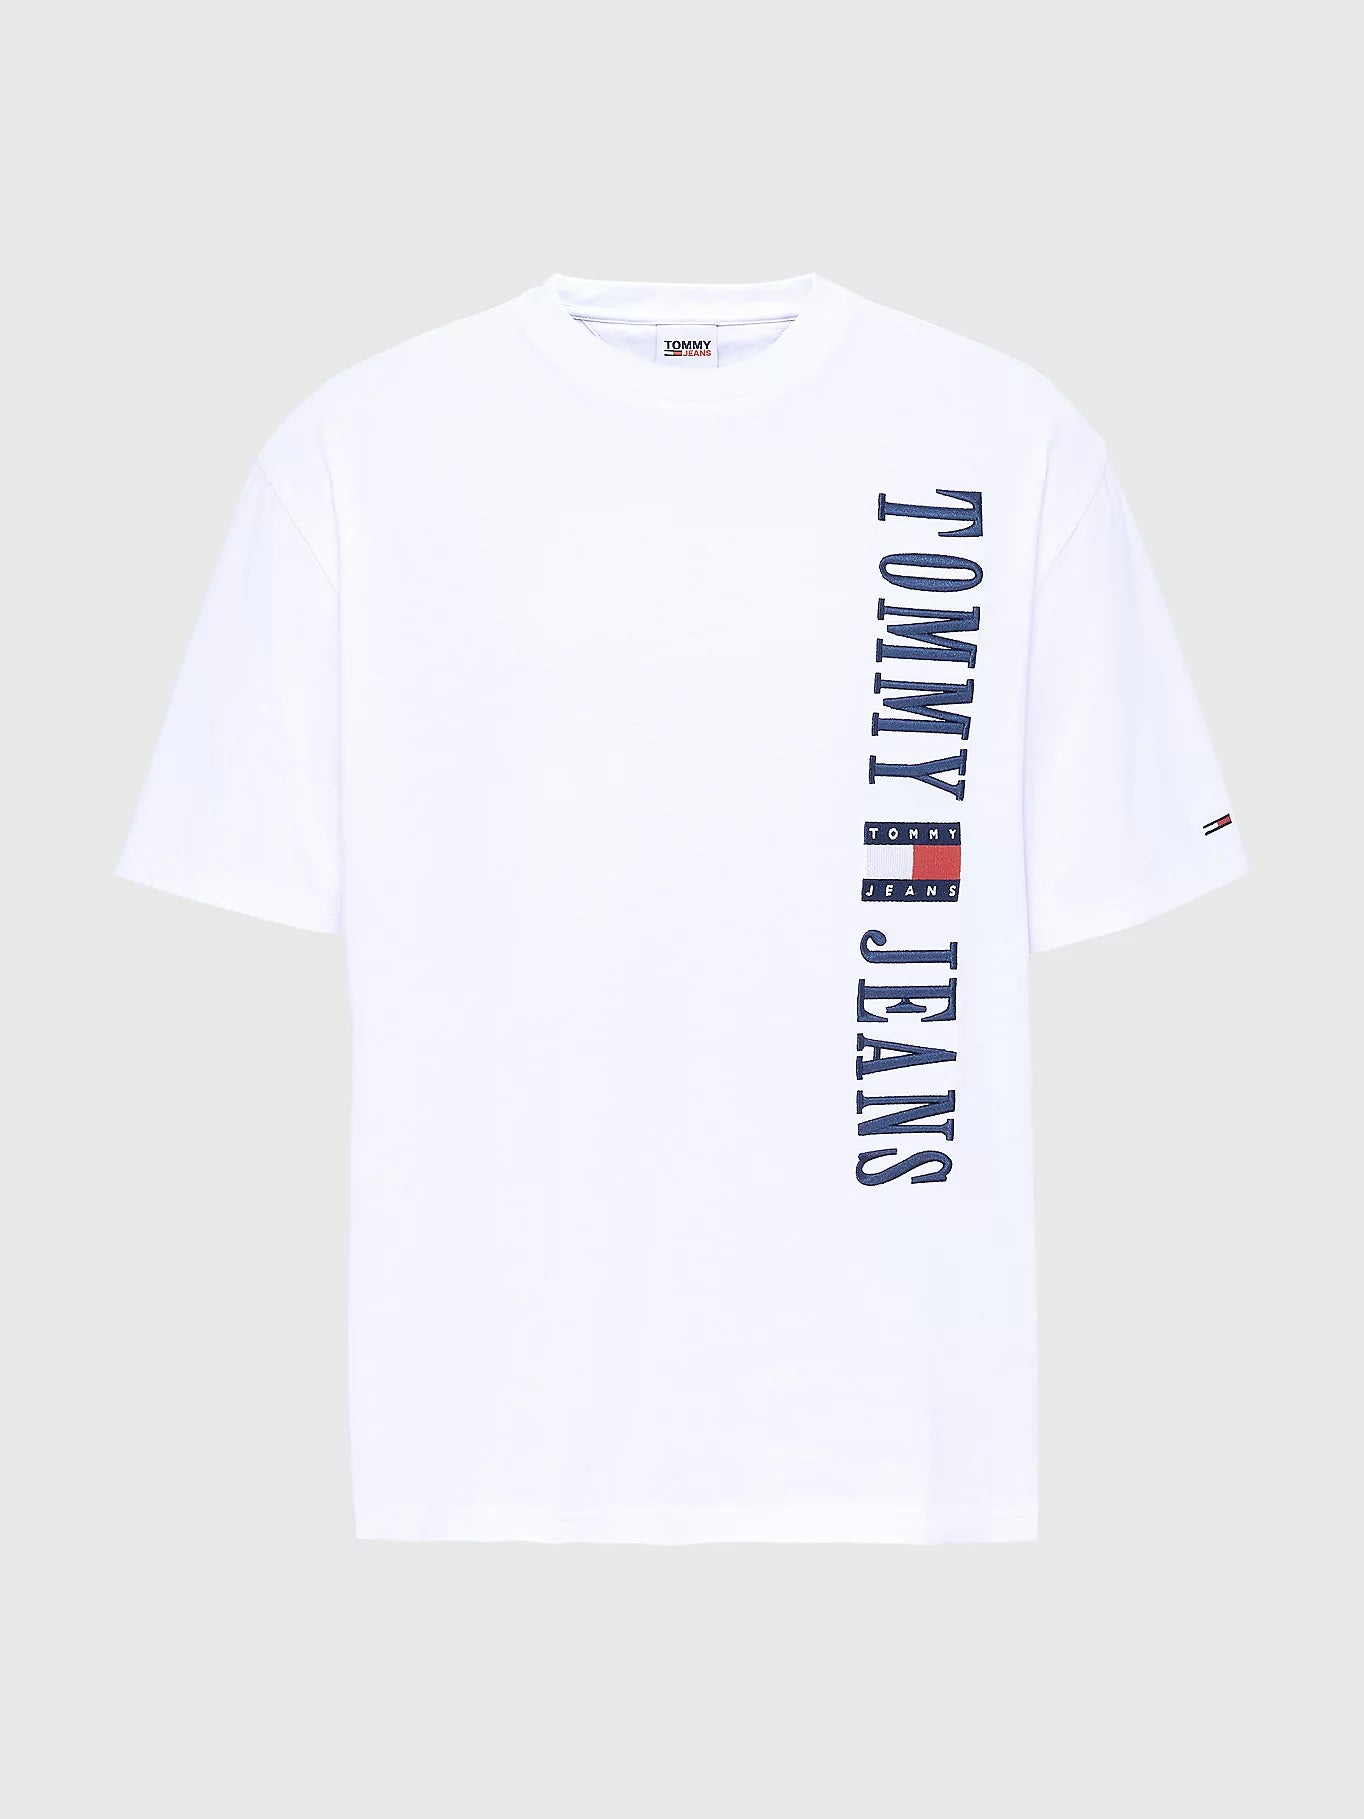 T-Shirt logo vertical Tommy Jeans blanc I Georgespaul